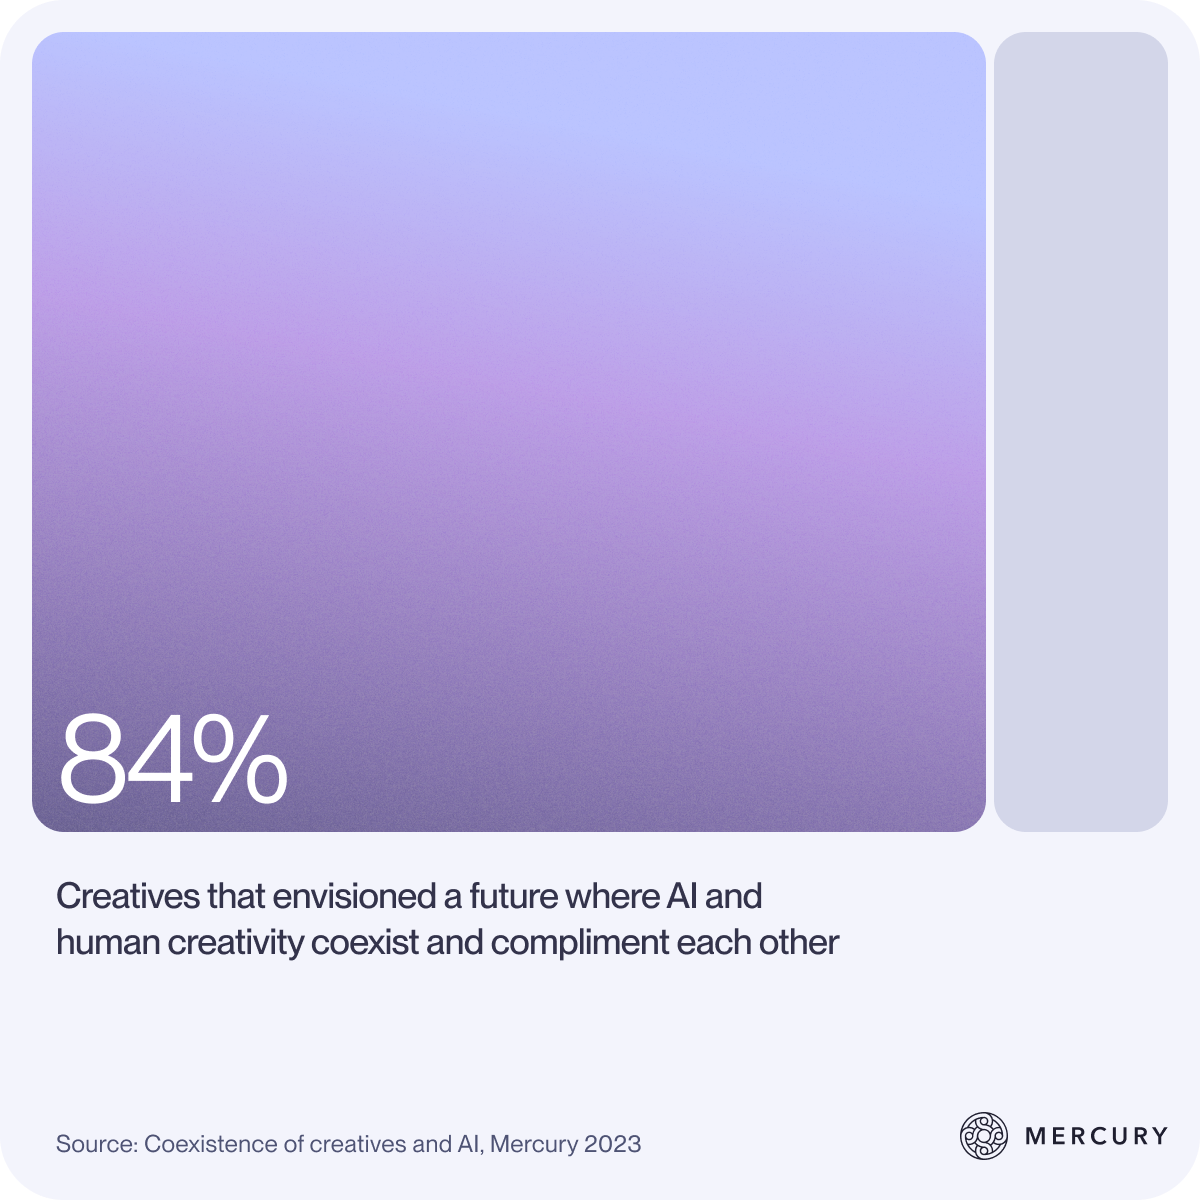 Bar chart showing that 84% of creatives have envisioned a future where AI and human creativity coexist and compliment one another